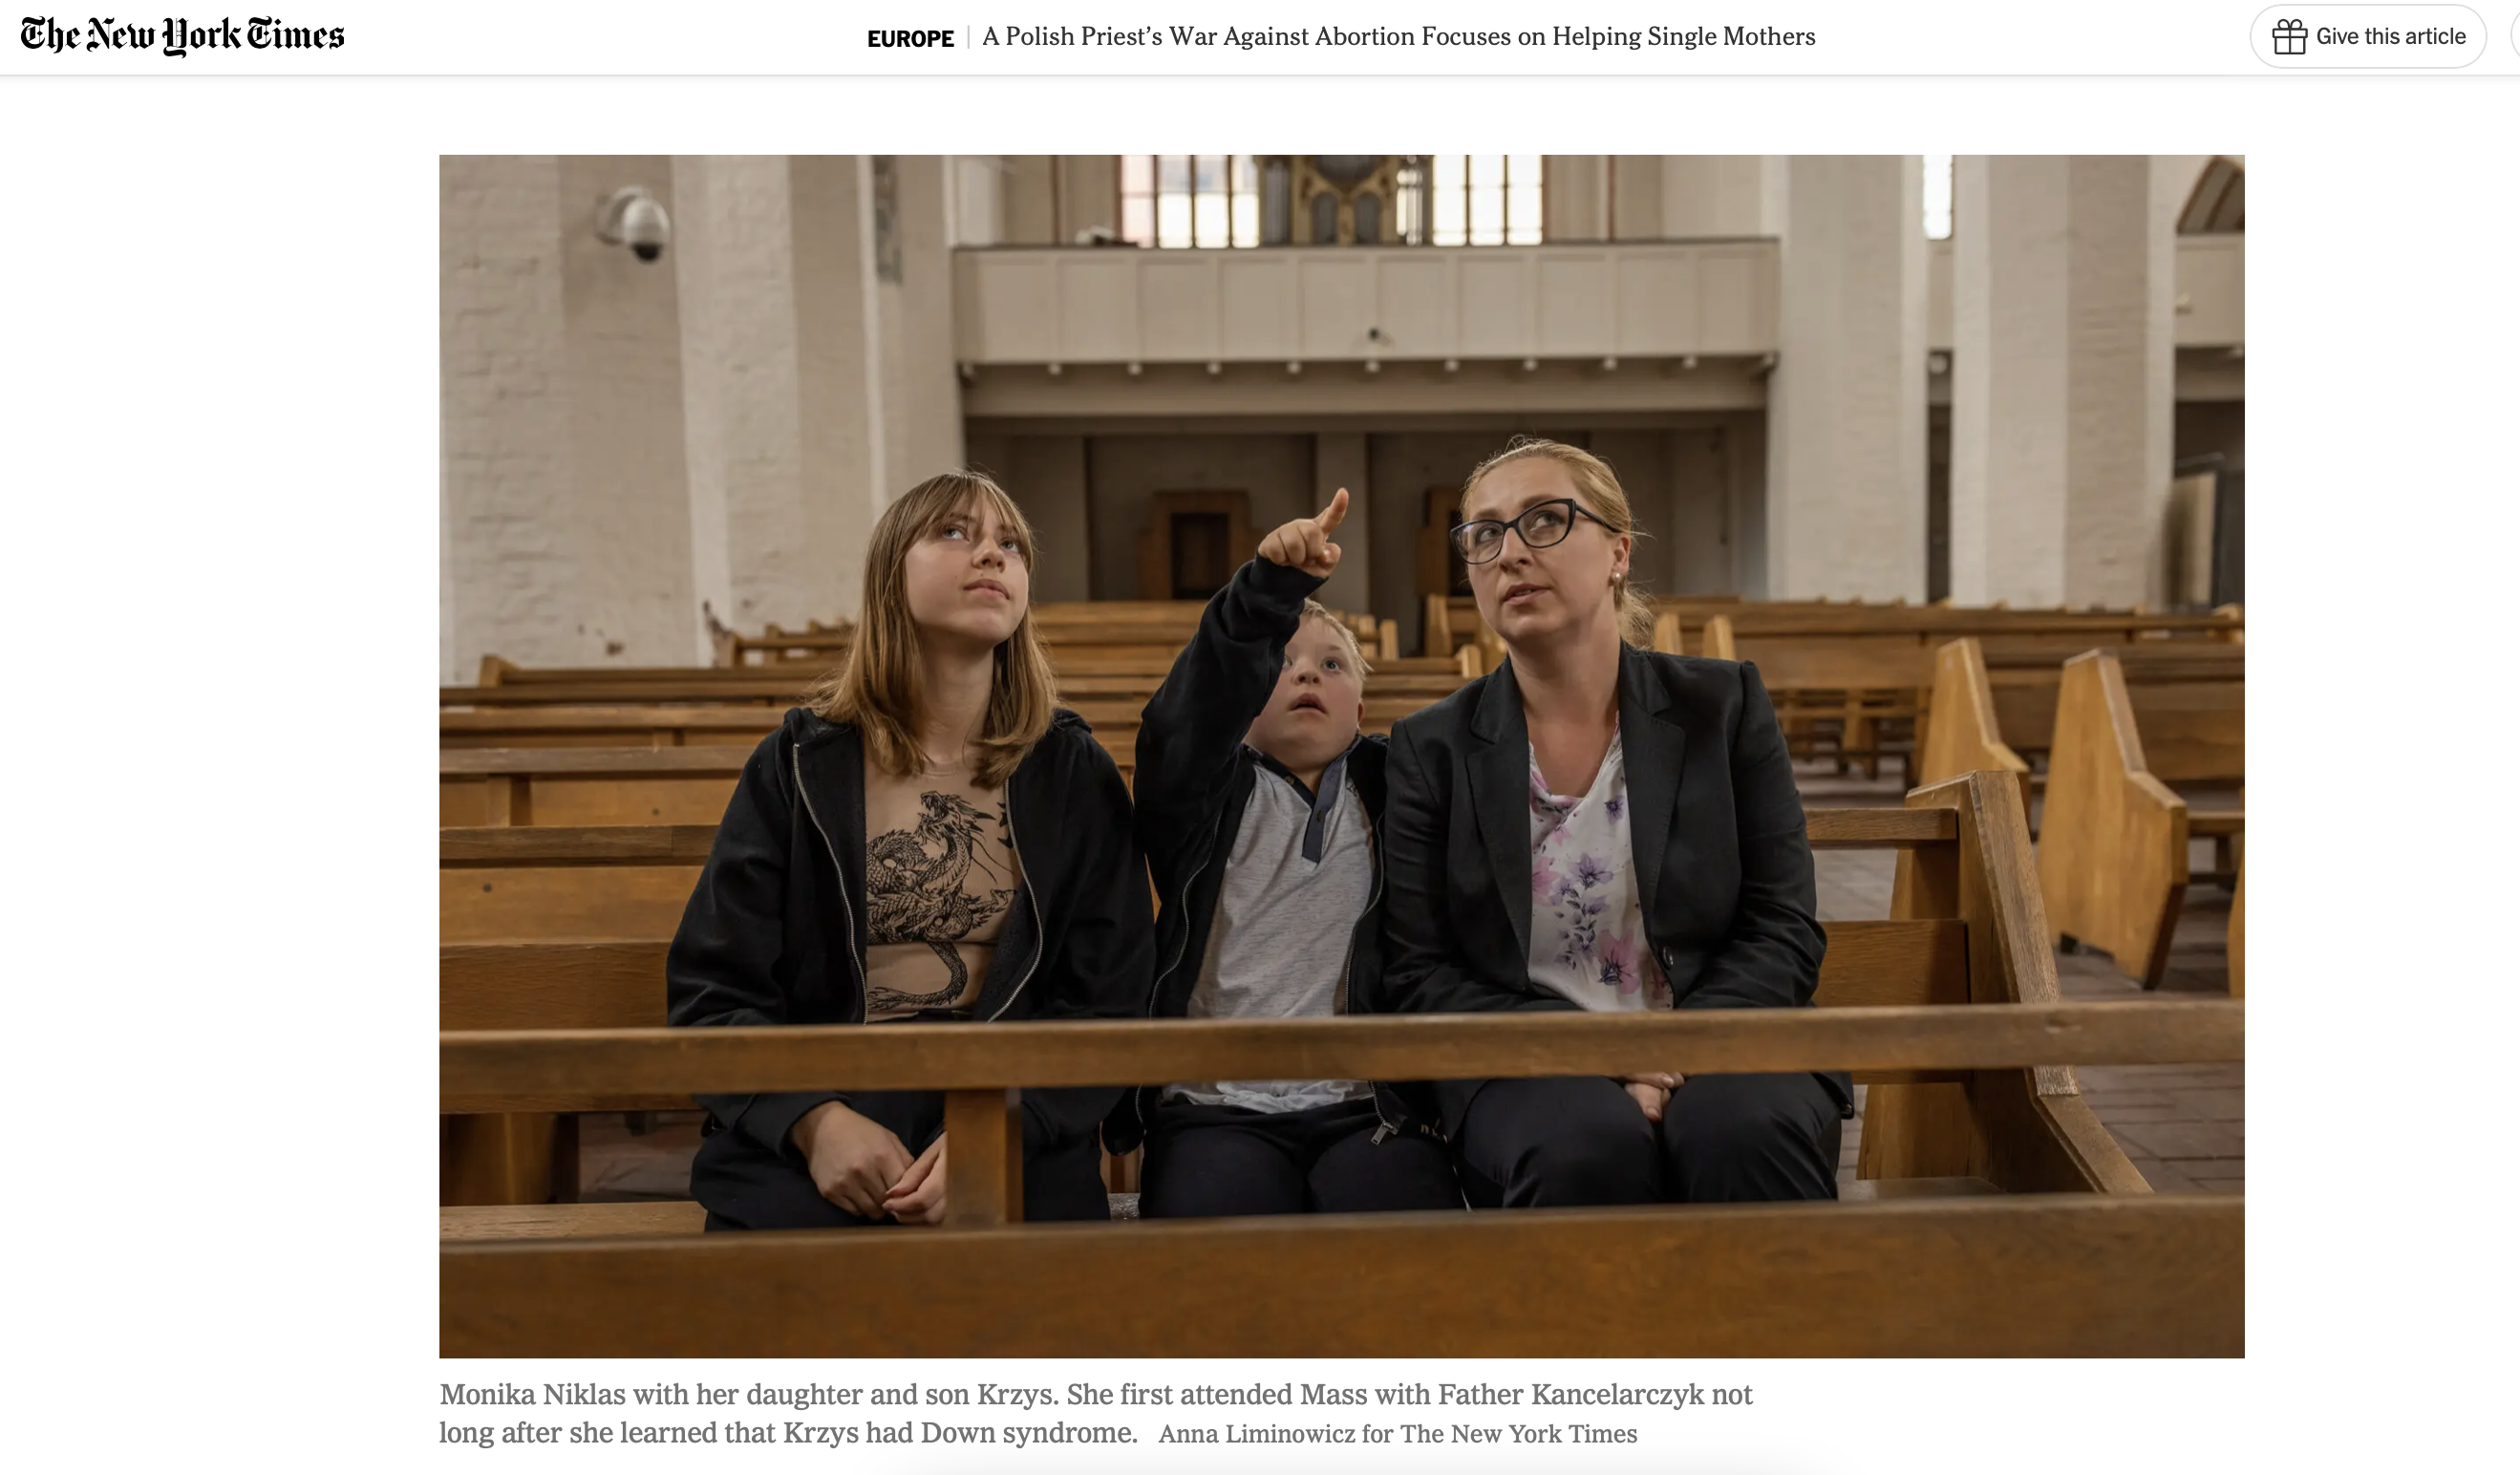 Art and Documentary Photography - Loading the_new_york_times_anna_liminowicz_8.png